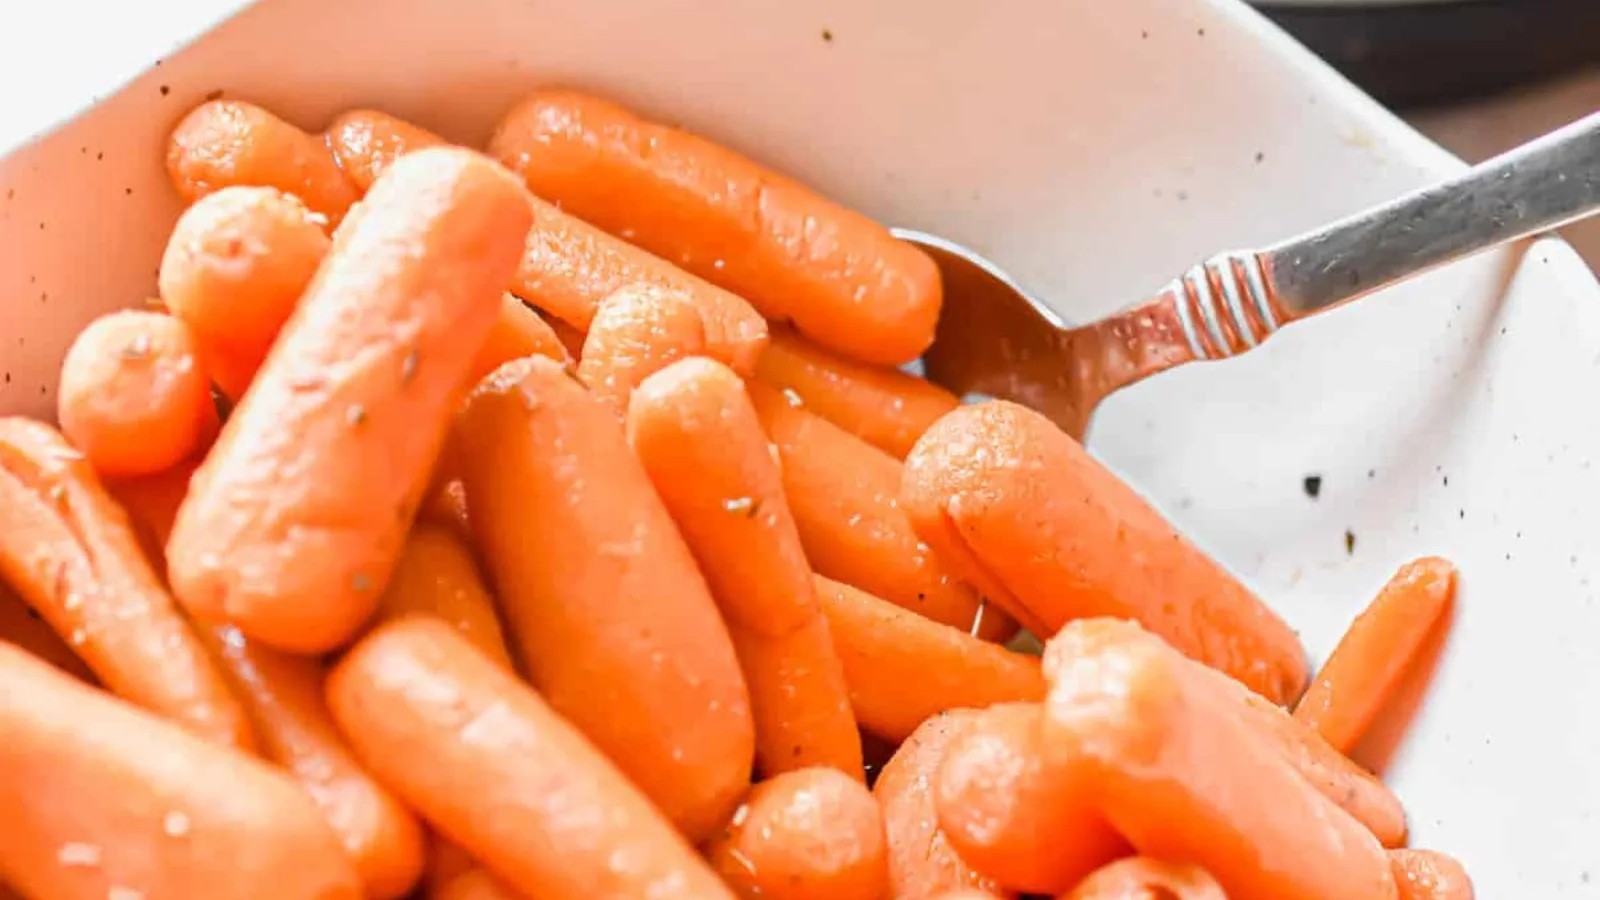 A bowl of baby carrots with a spoon.